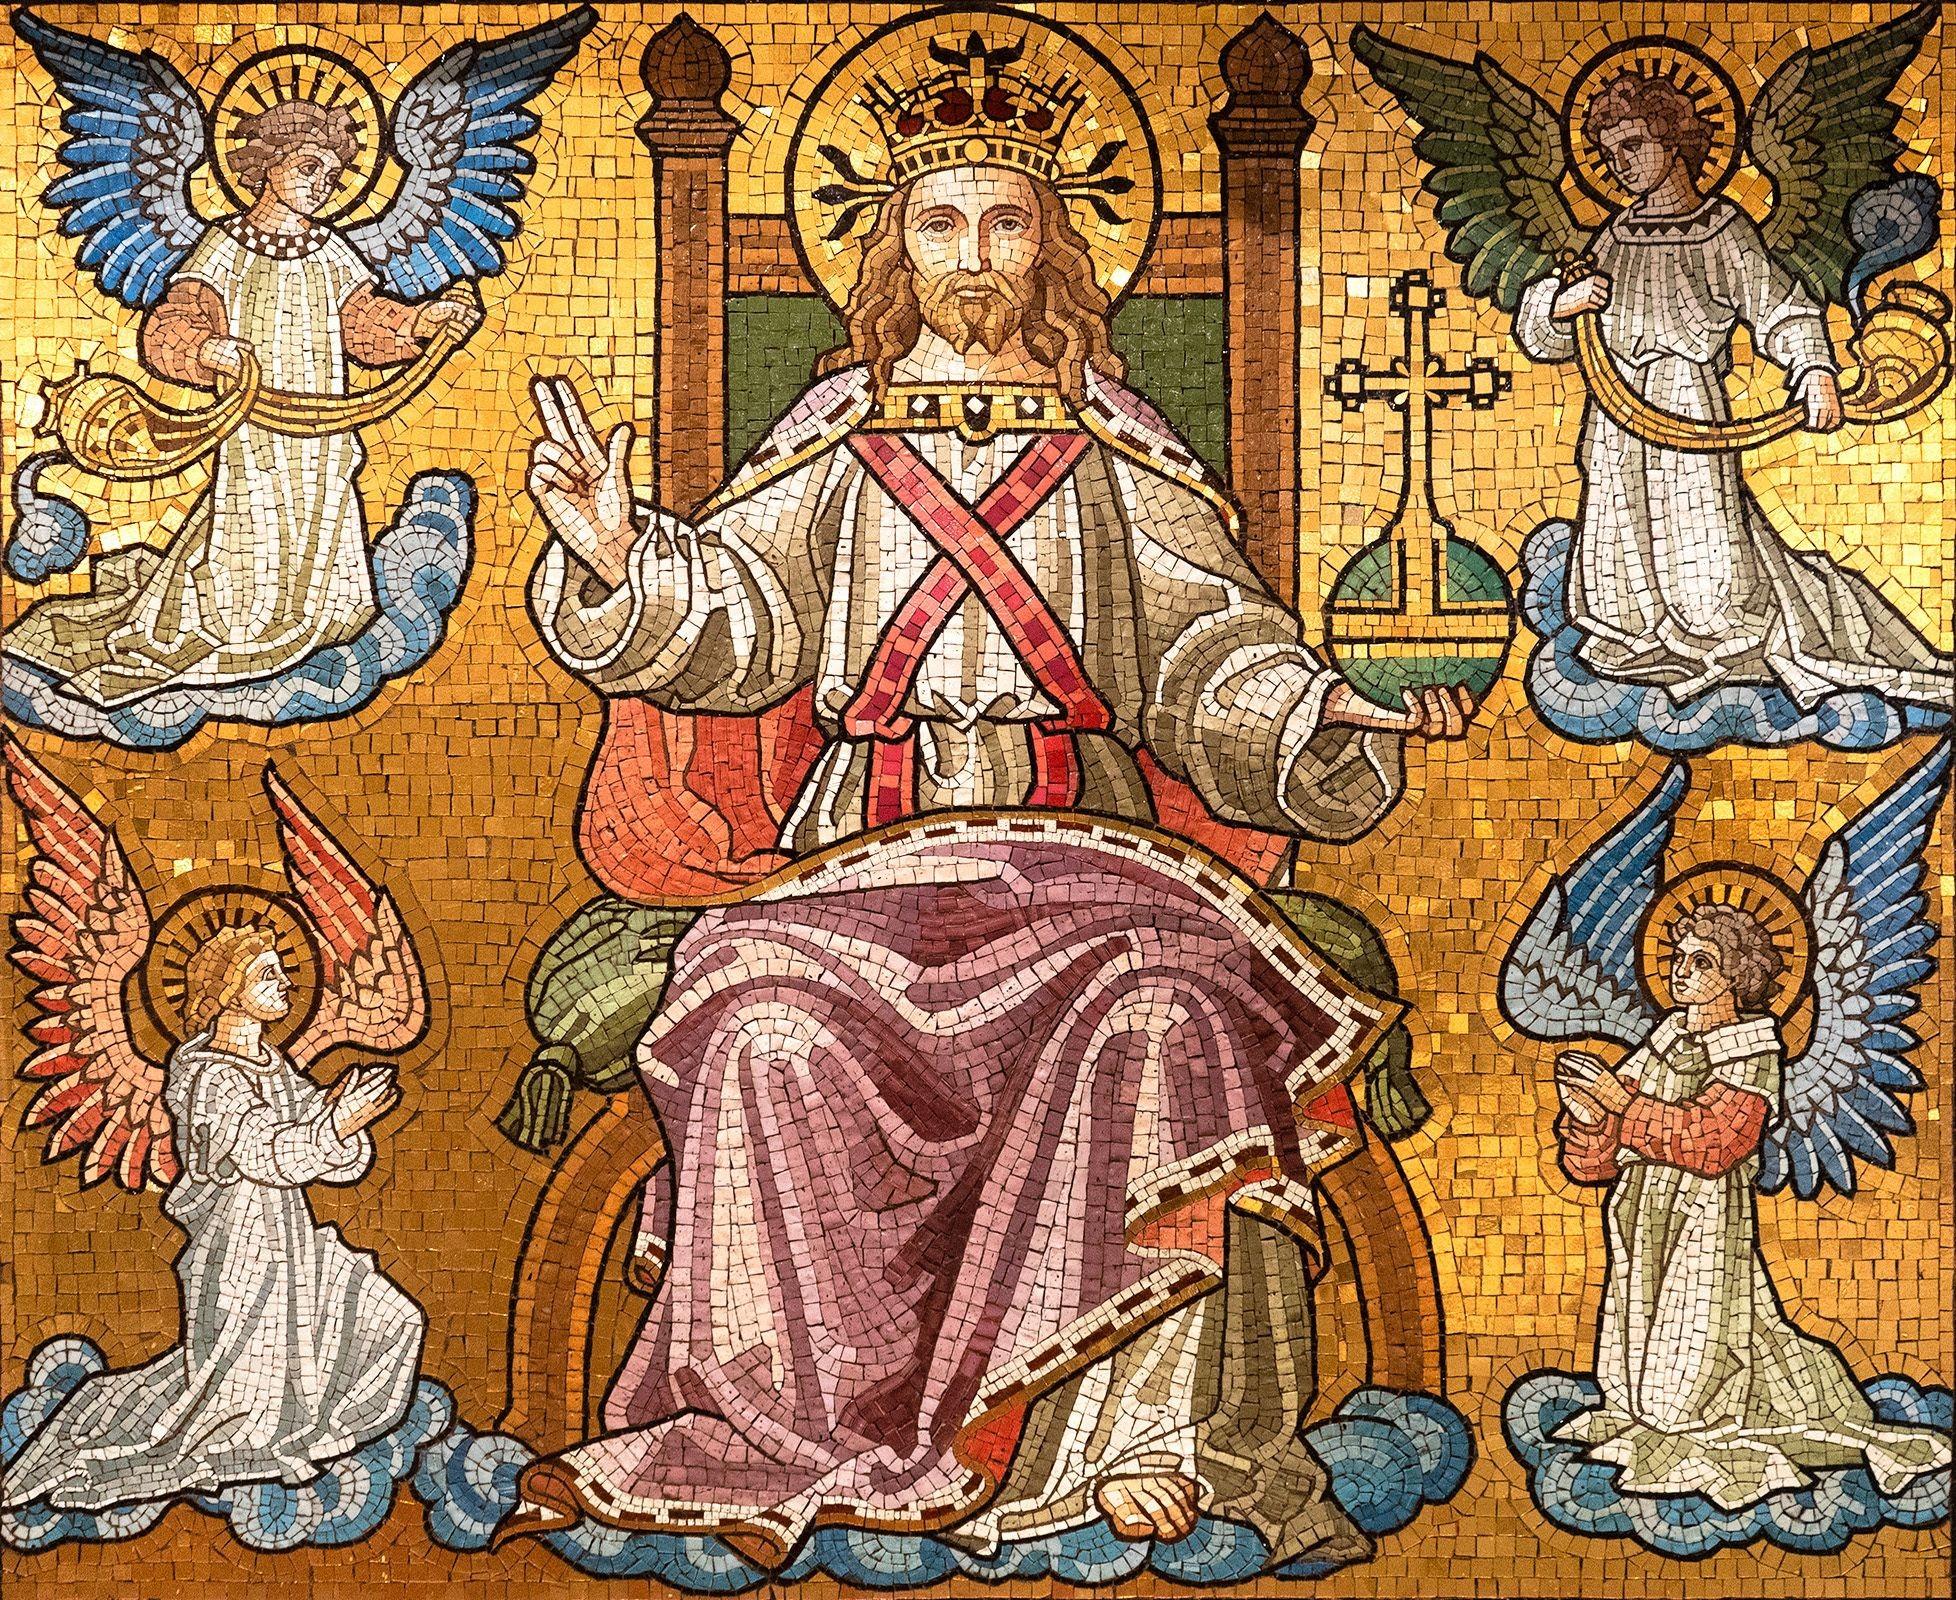 A 19th century mosaic depicting Christ and angels.
Dimensions: 39 x 46 inches.